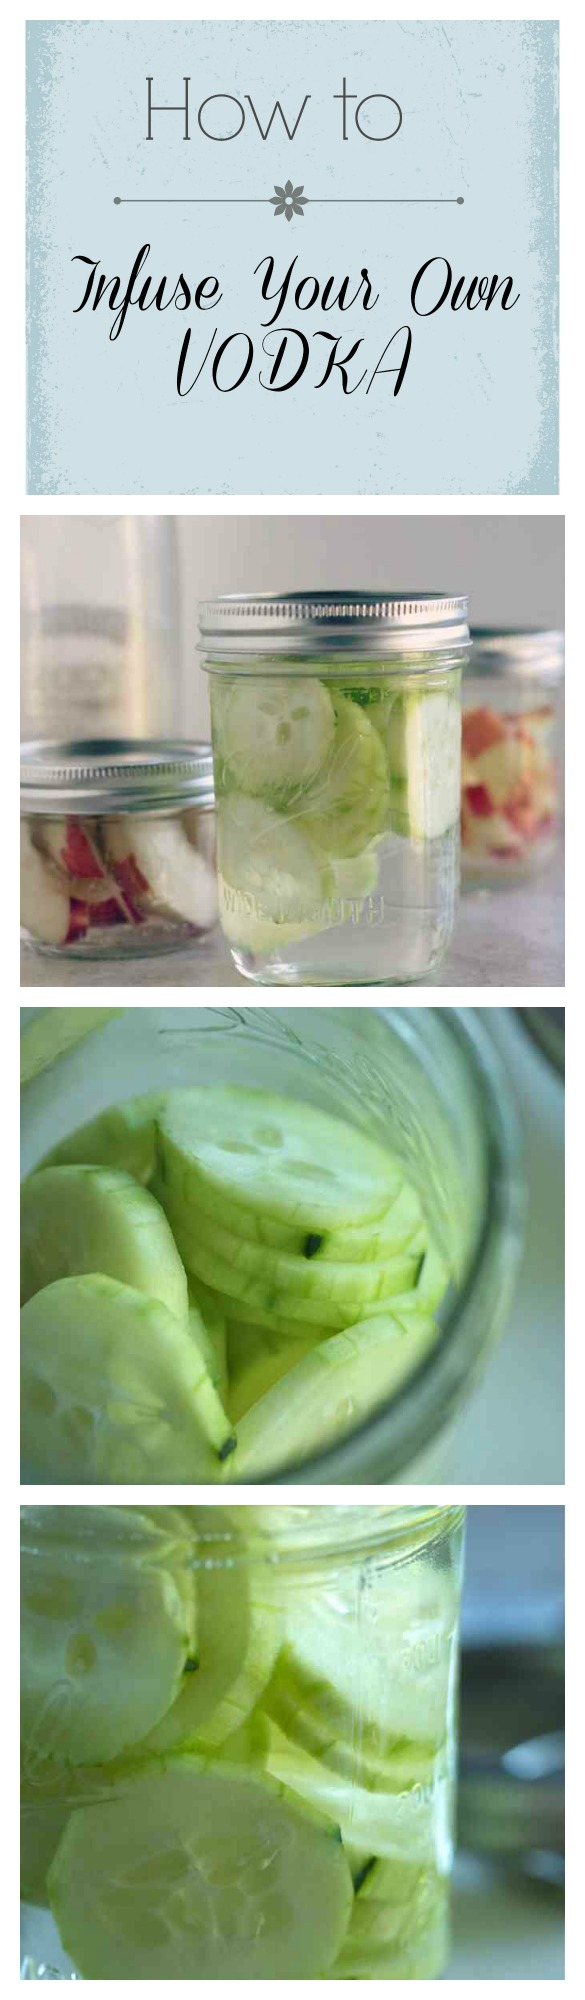 How to tuesday : how to infuse vodka